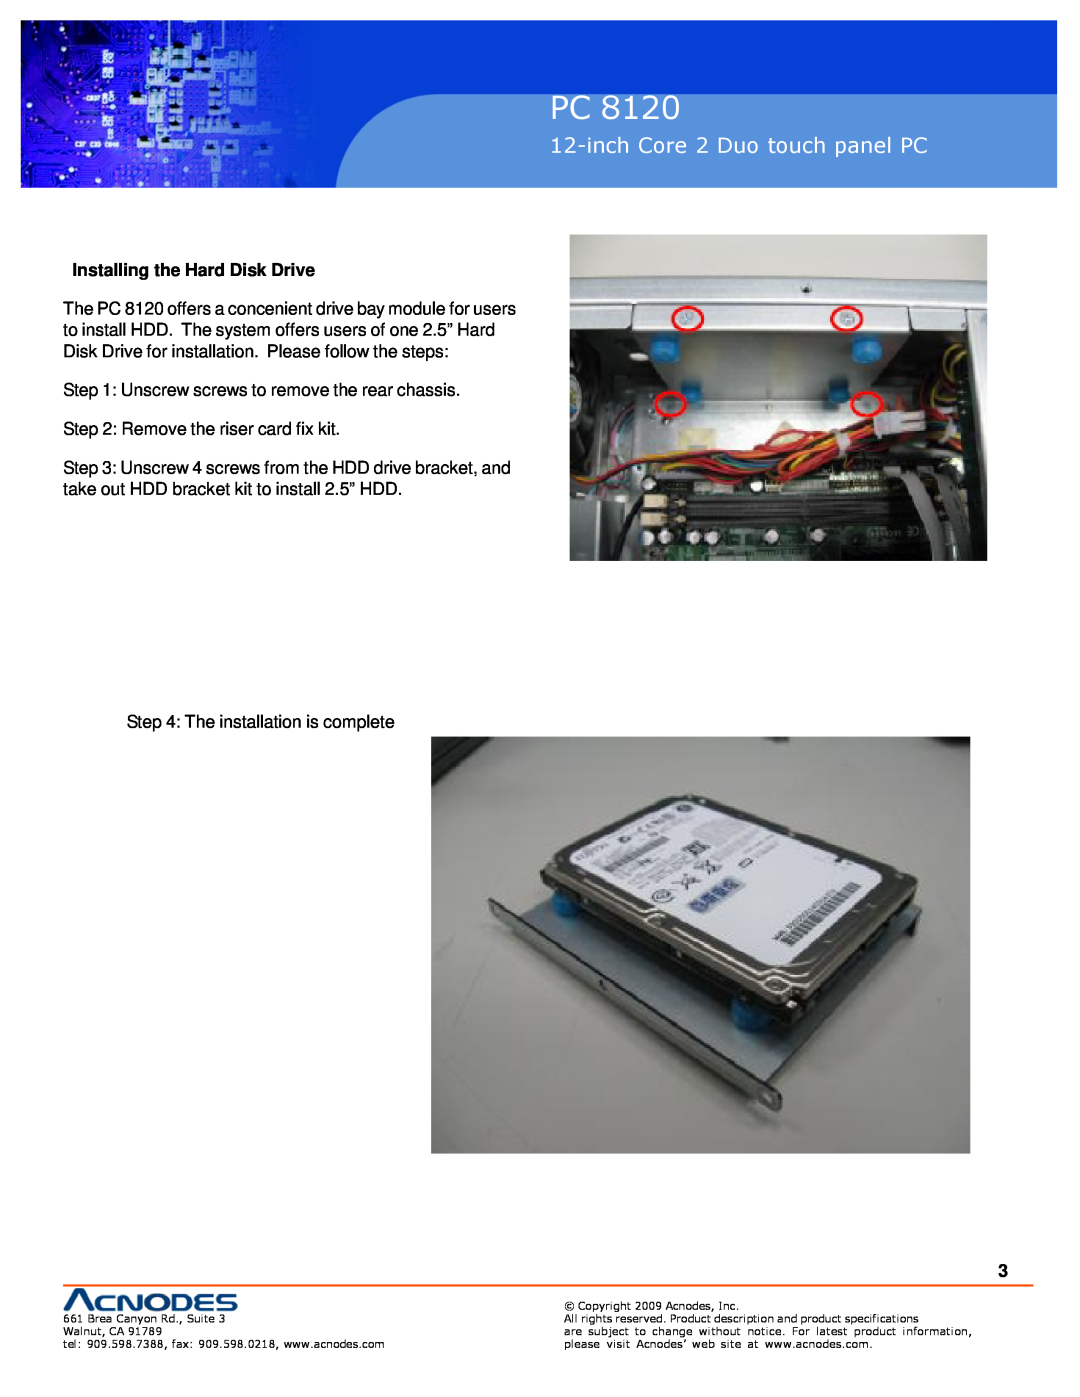 Acnodes PC 8120 specifications Installing the Hard Disk Drive, inch Core 2 Duo touch panel PC 